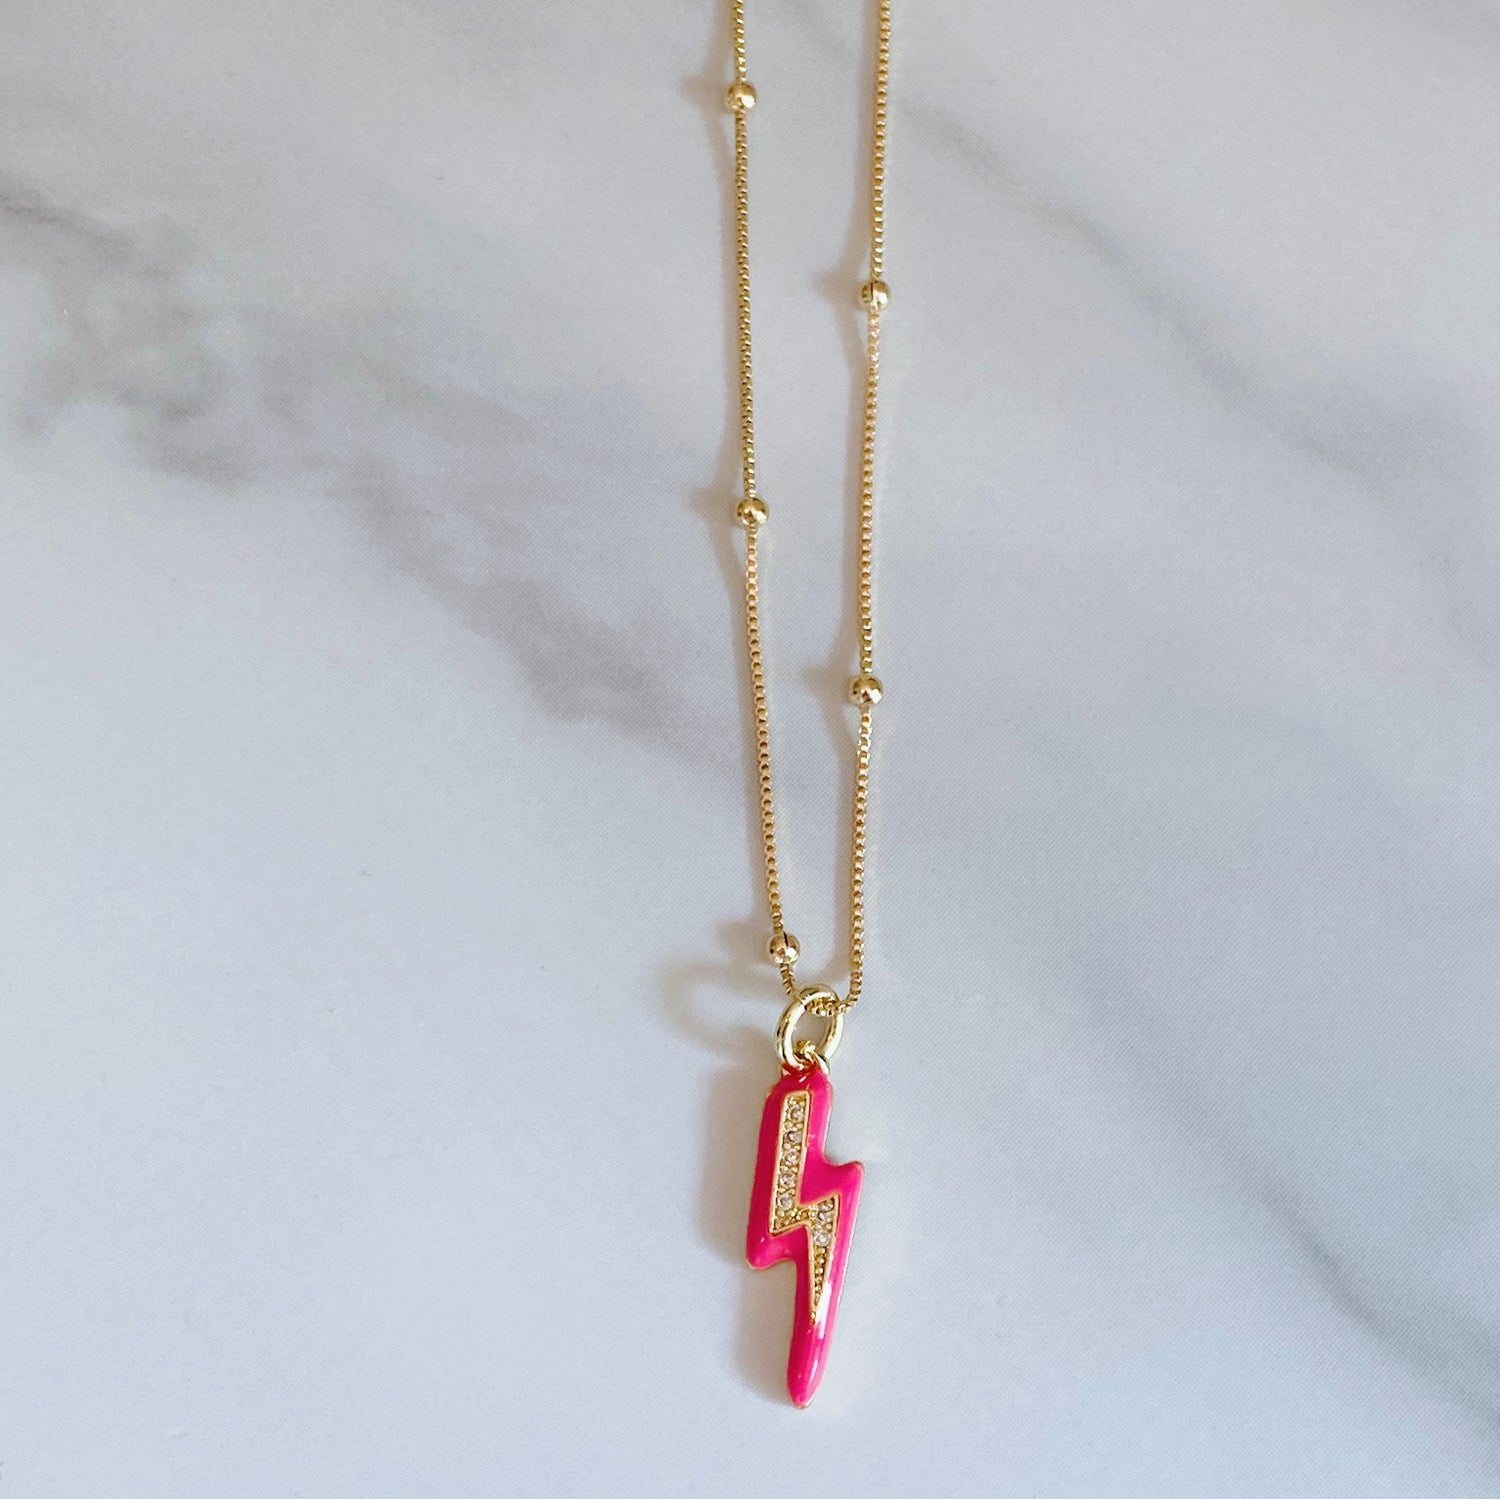 Jens lighting bold necklace, pink enamel, gold-plated bold, gold-foilled necklace by ISVI Boutique Miami